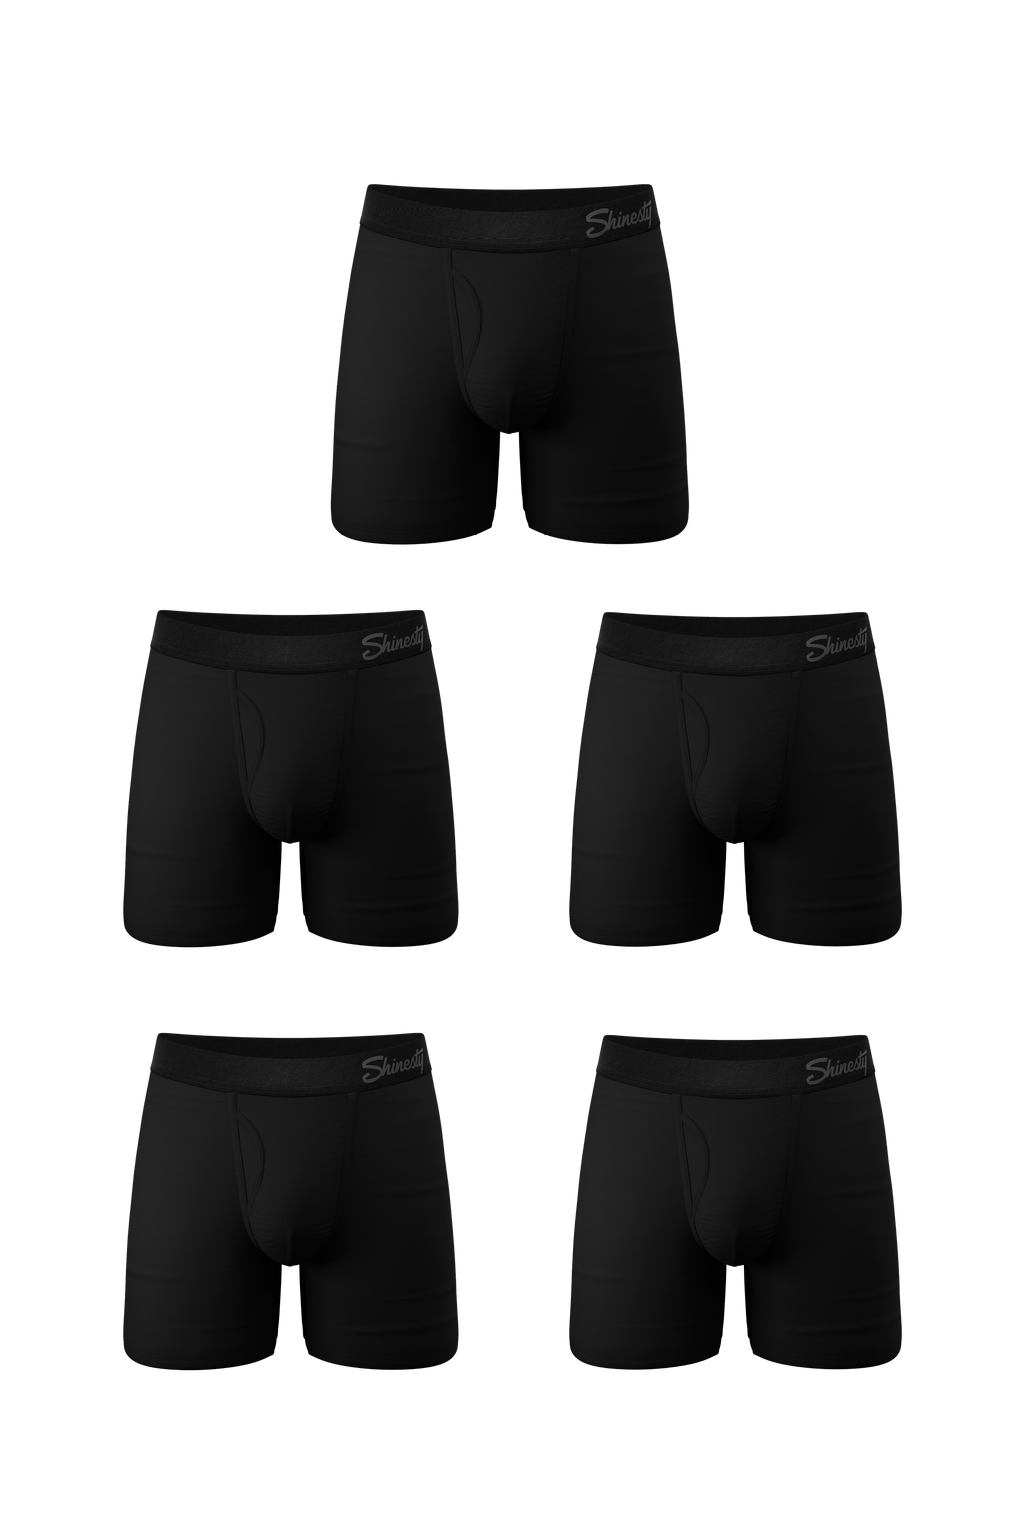 A group of Ball Hammock® underwear with mesh panels for cooling comfort.